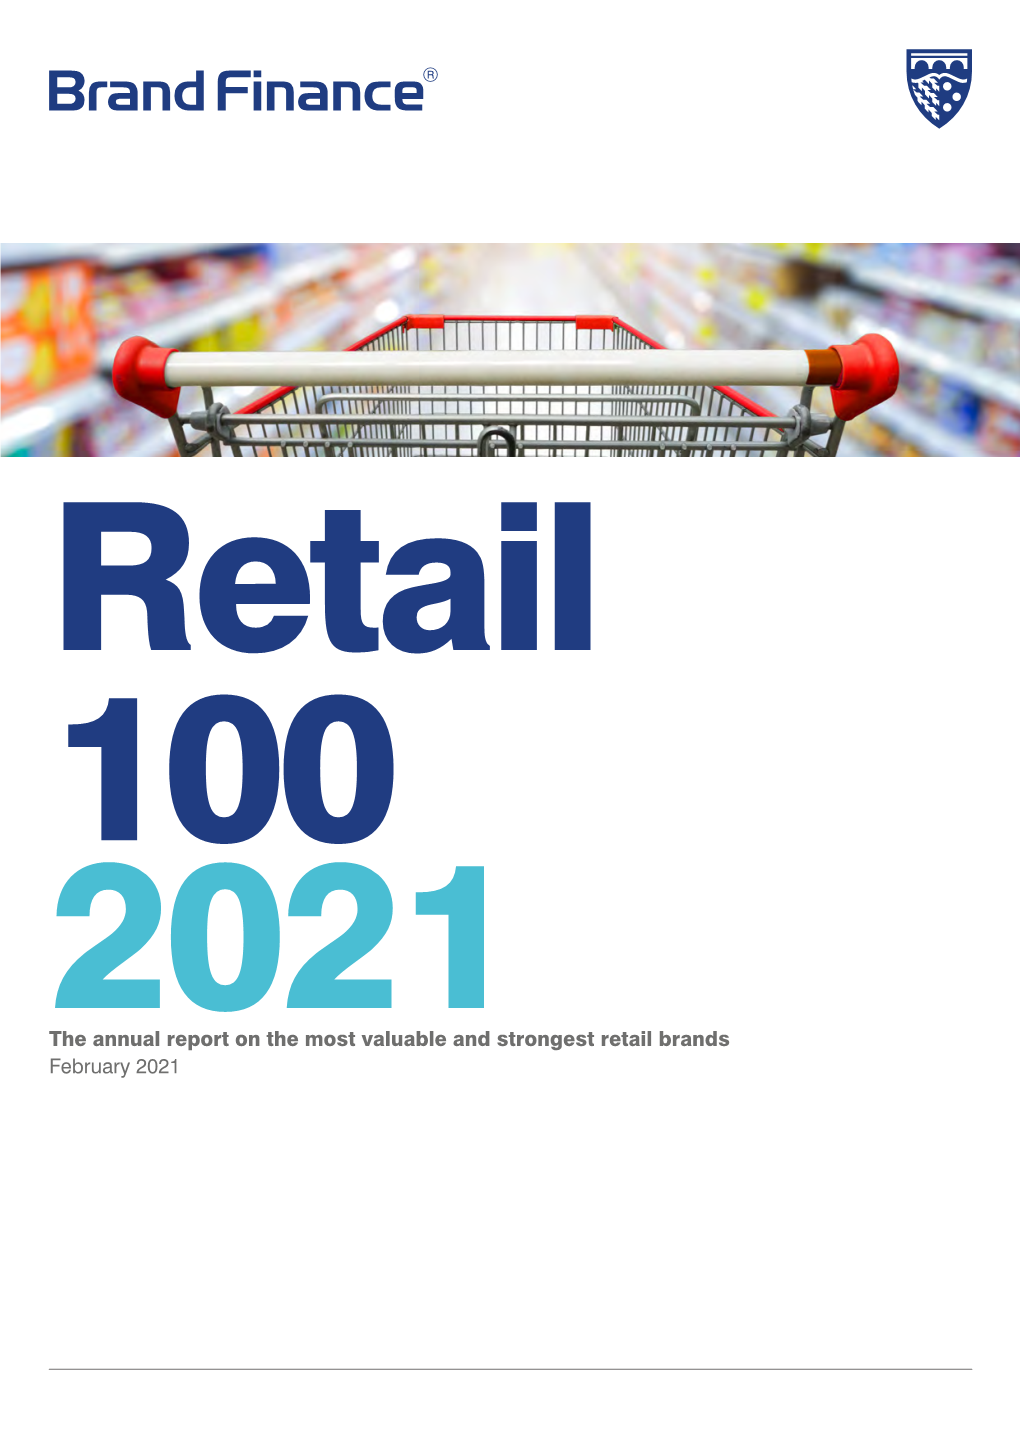 The Annual Report on the Most Valuable and Strongest Retail Brands February 2021 Contents